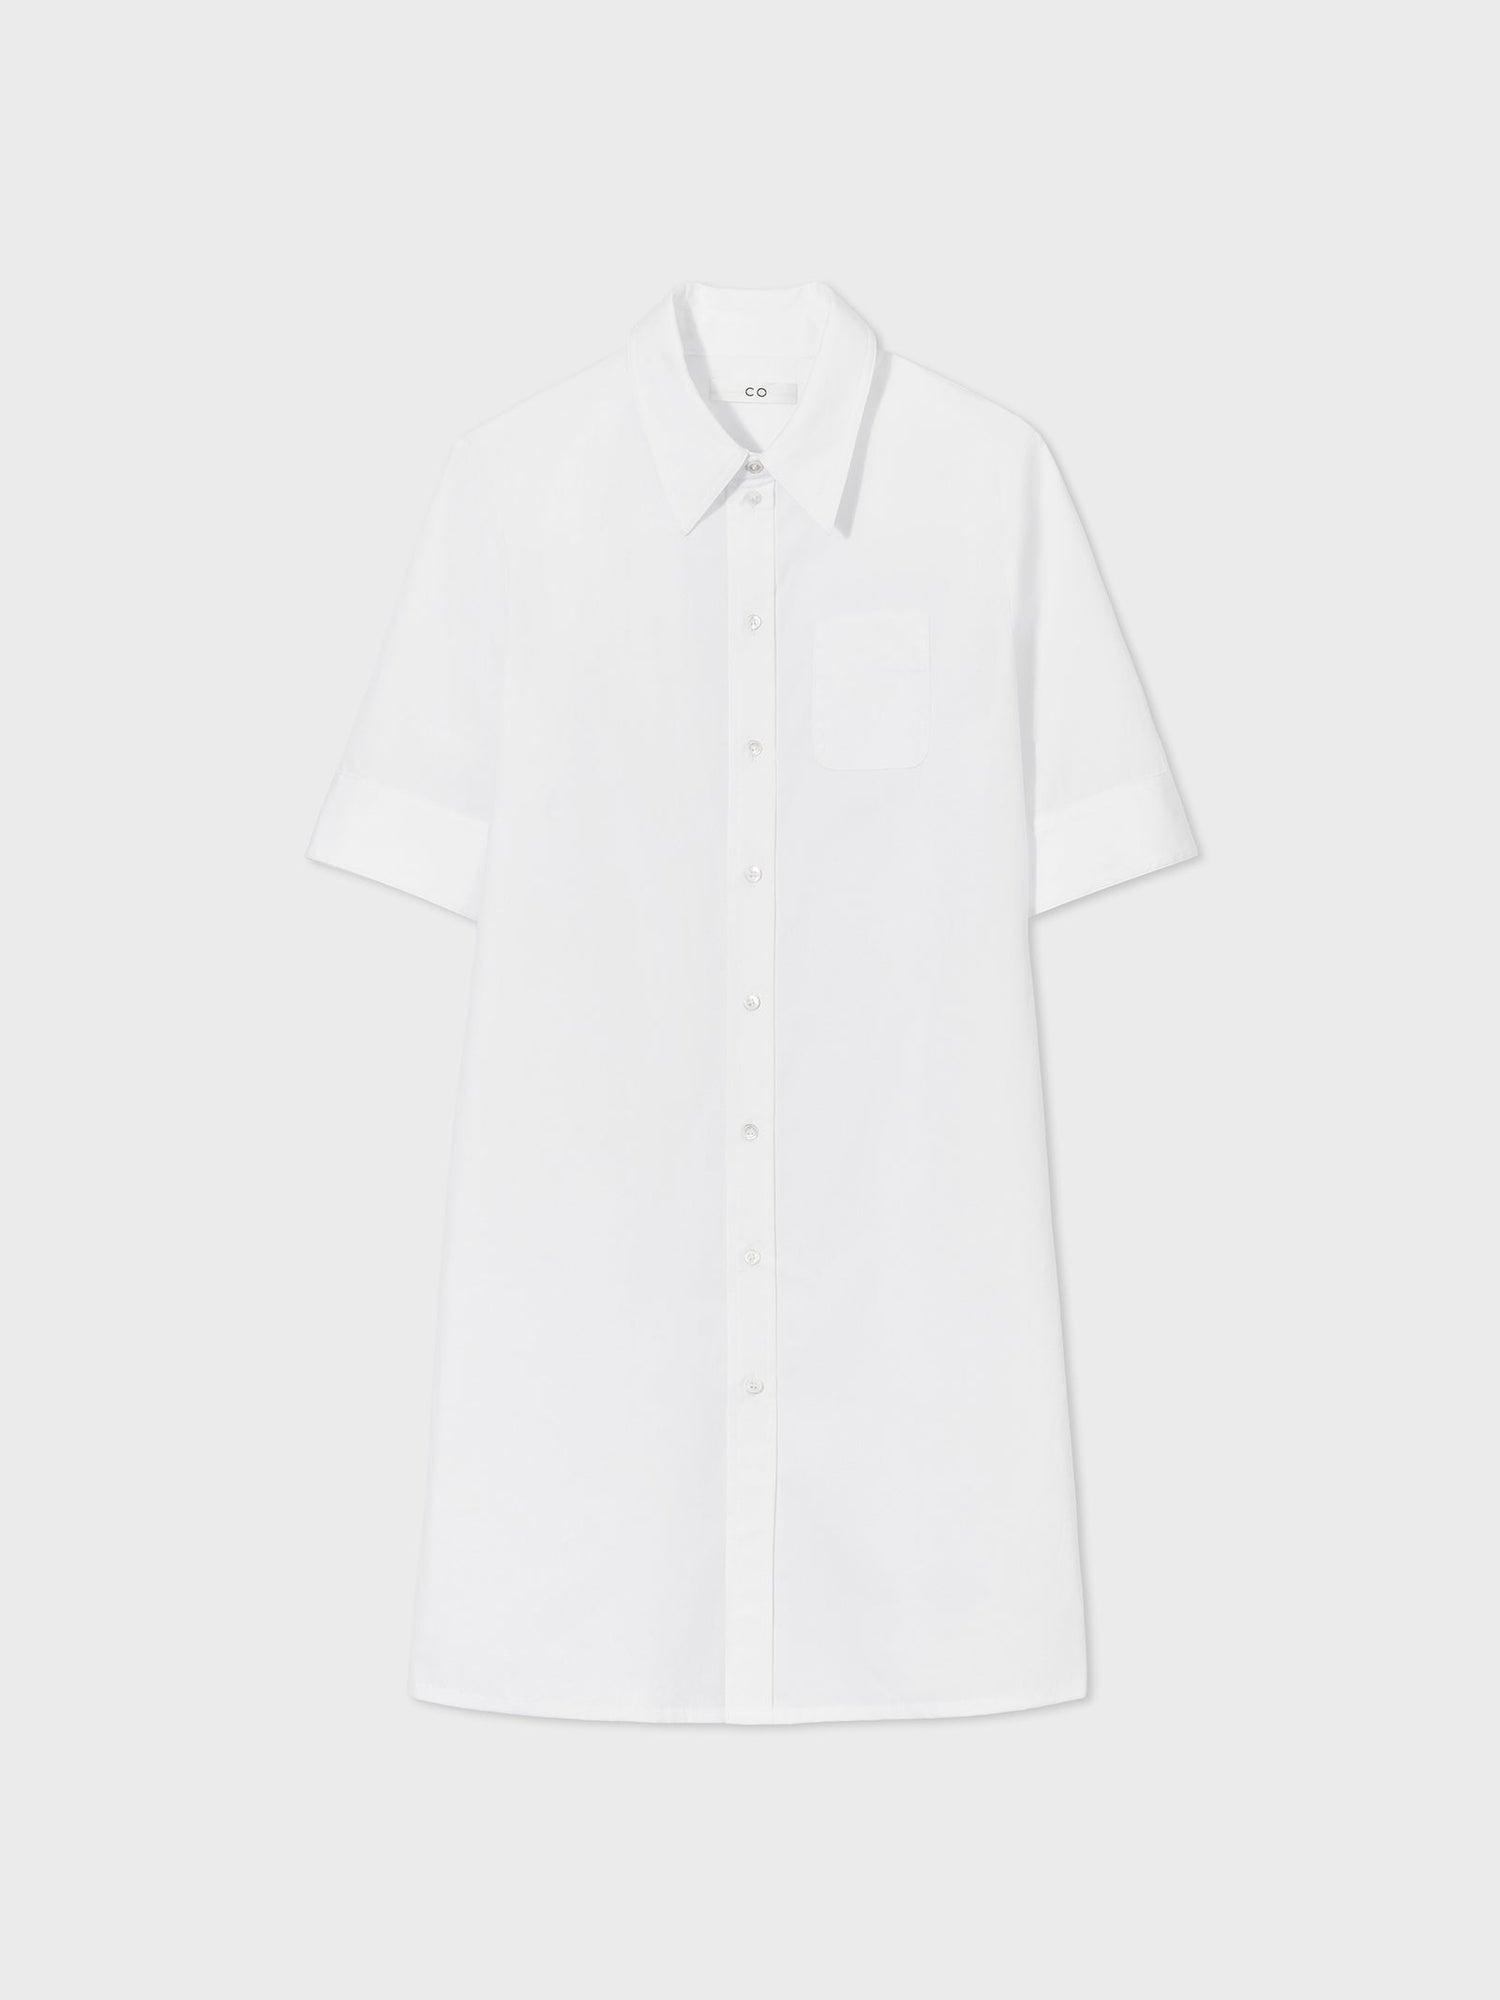 CO Fitted Shirtdress in Cotton Poplin